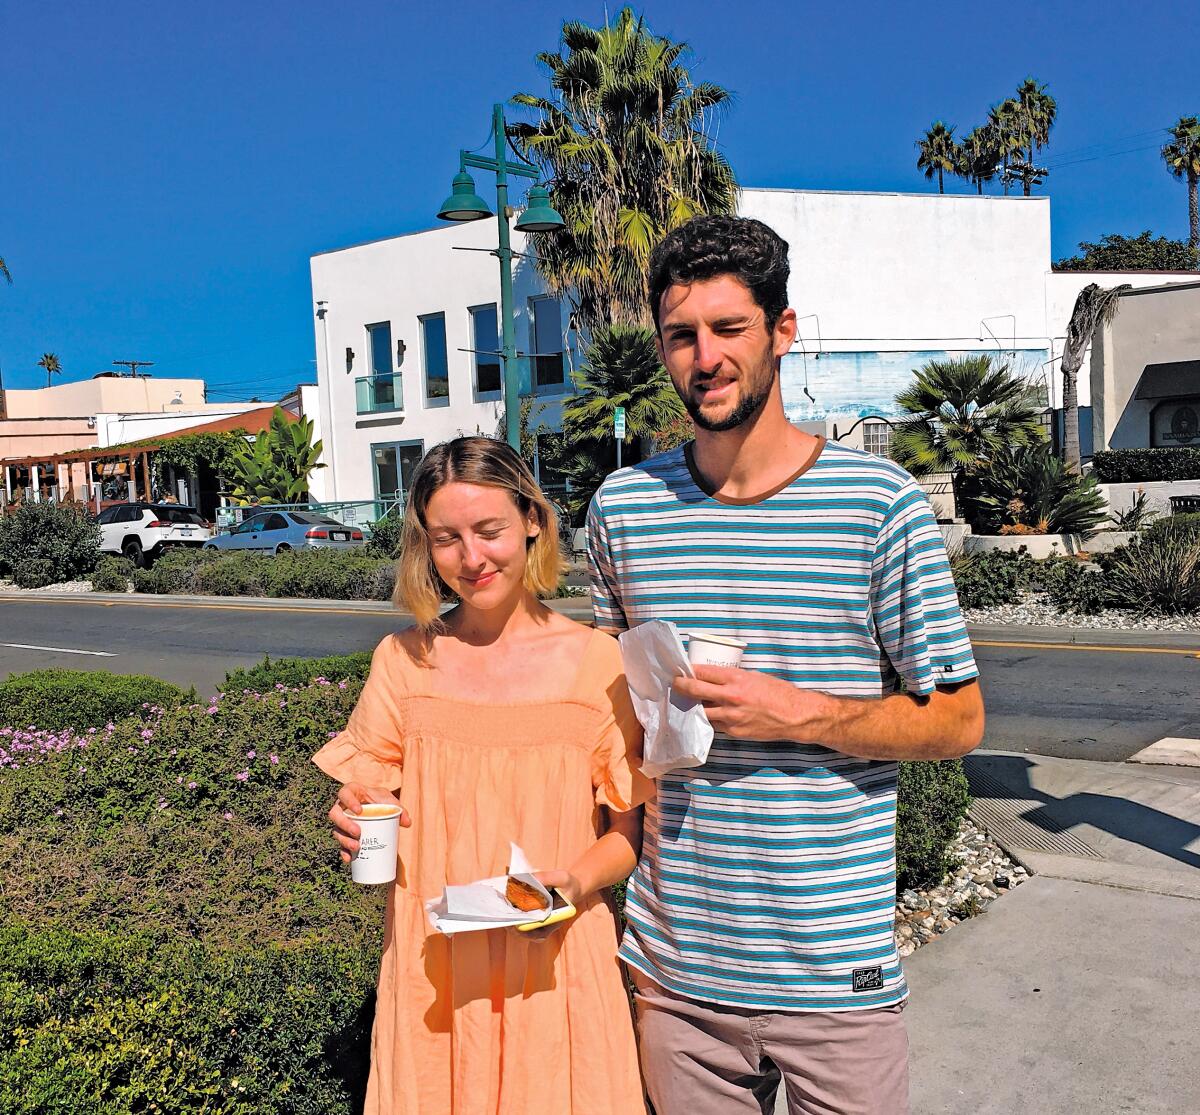 After crossing La Jolla Boulevard near a roundabout, Trevor Port and Makenzie Lowe report: 'It feels safer with cars going slower and drivers more aware.'